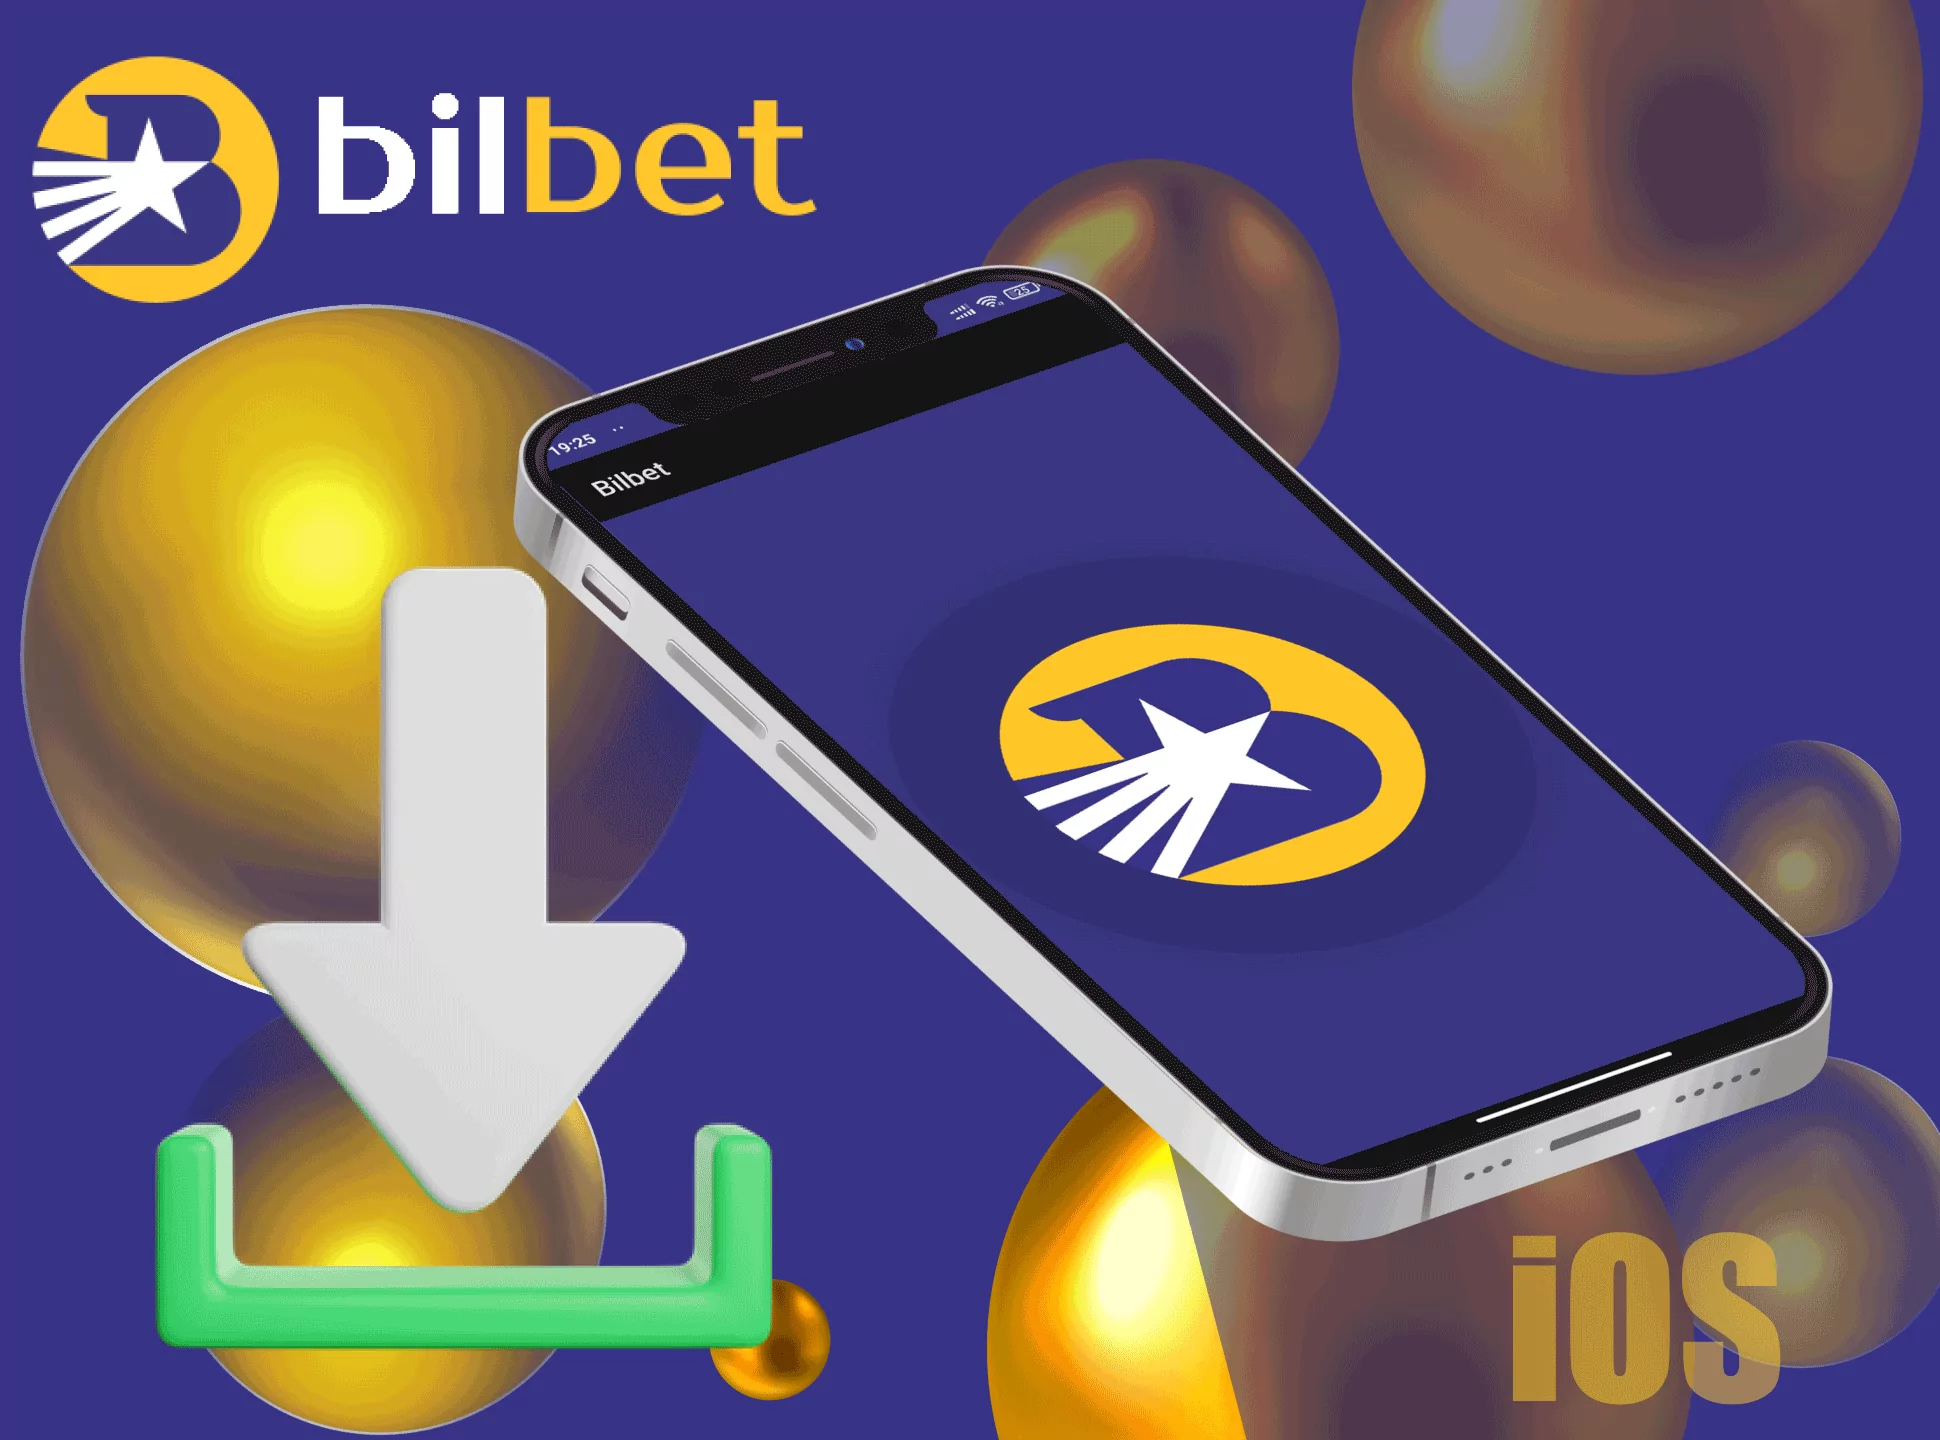 Bilbet has a special mobile app for iPhones and iPads to bet via them.